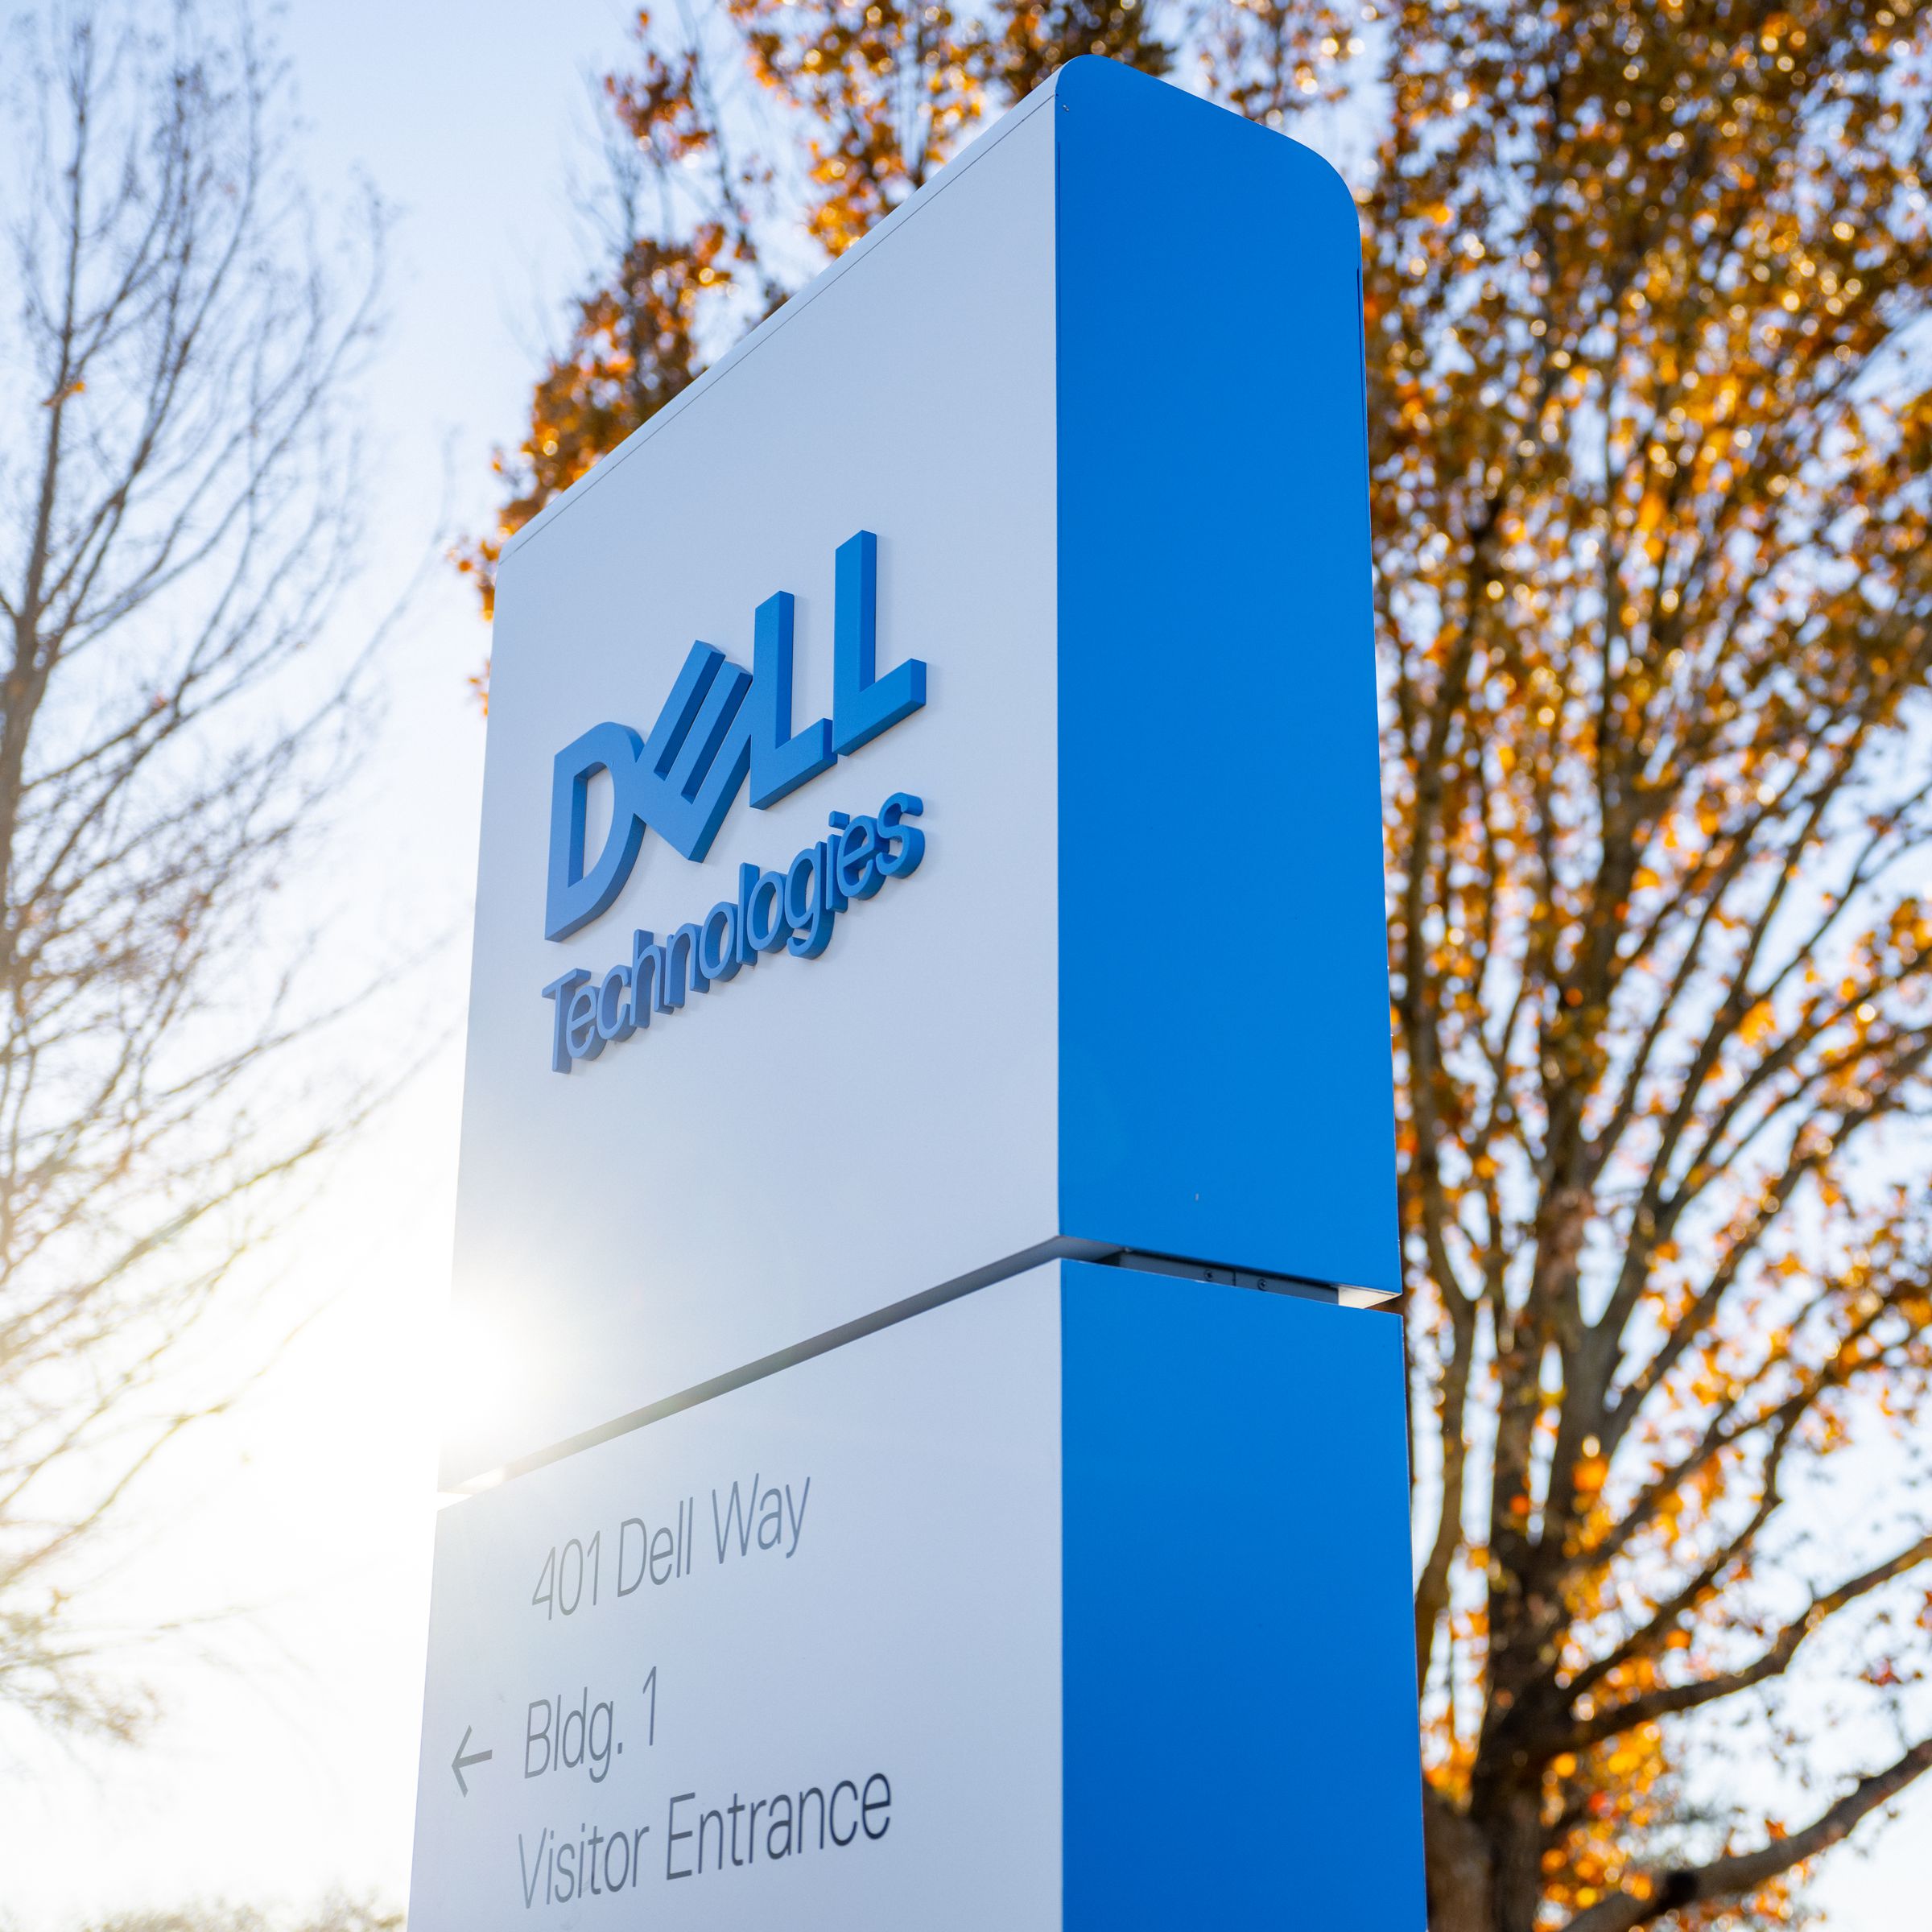 The sign for Dell Technologies at Round Rock in Austin, Texas.